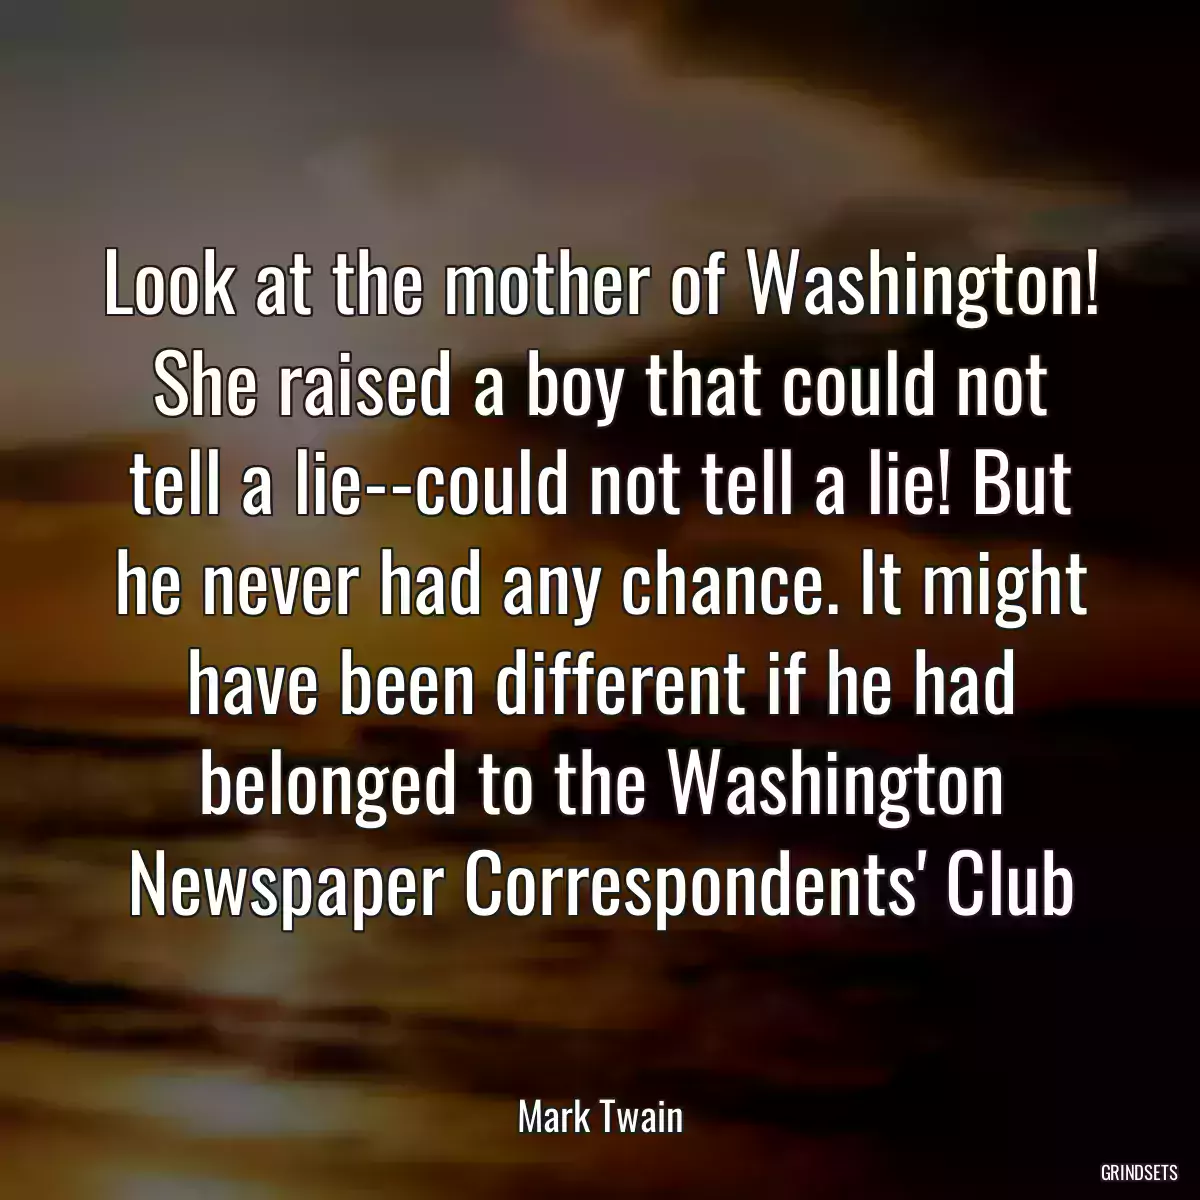 Look at the mother of Washington! She raised a boy that could not tell a lie--could not tell a lie! But he never had any chance. It might have been different if he had belonged to the Washington Newspaper Correspondents\' Club